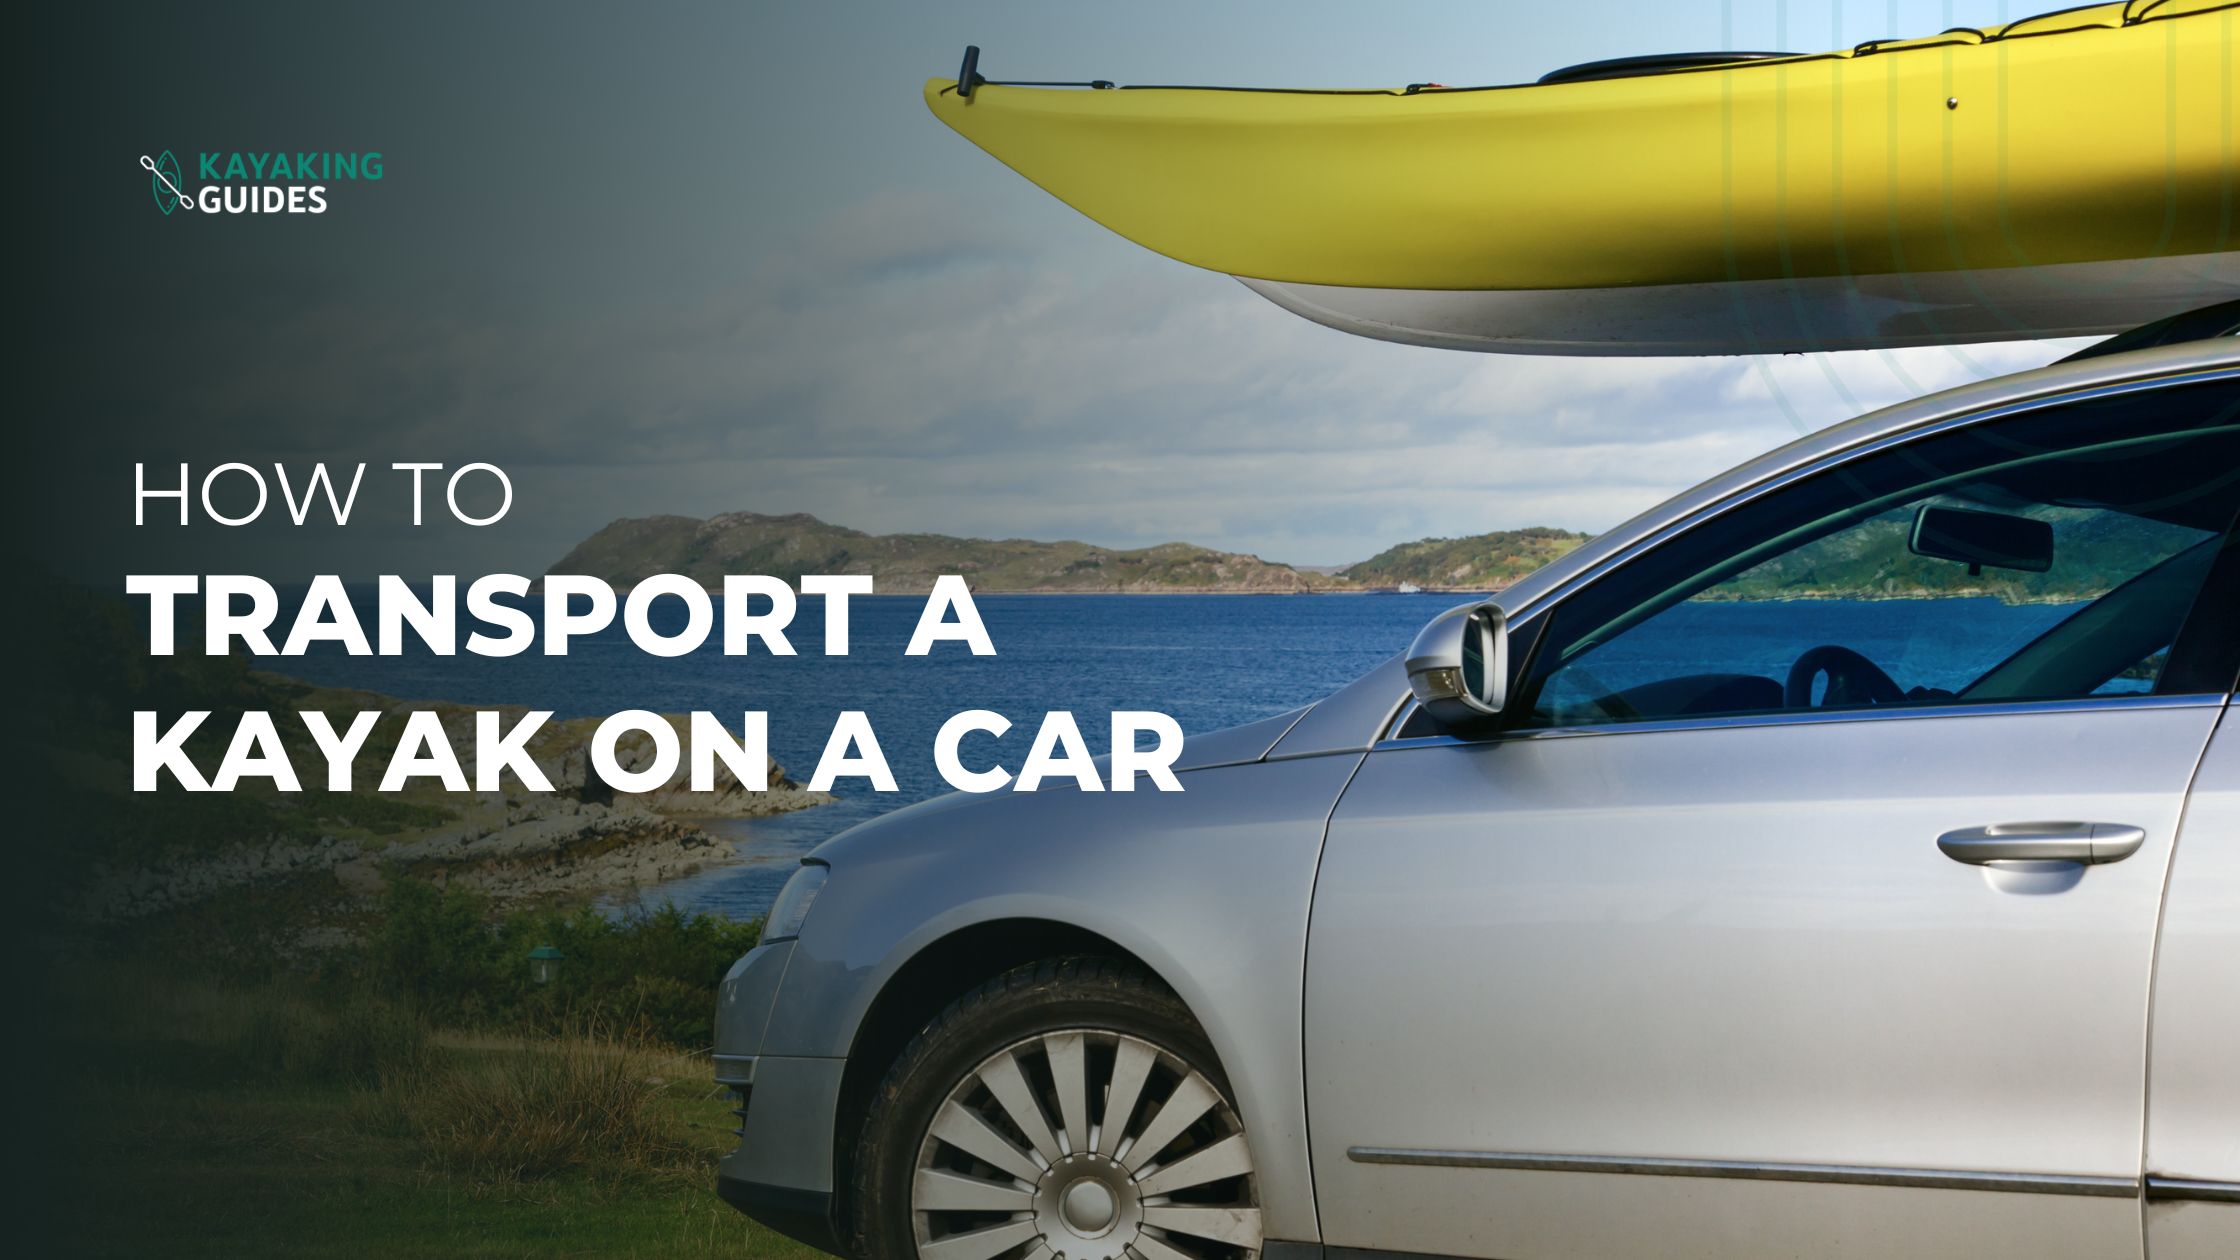 How To Transport A Kayak on A Car